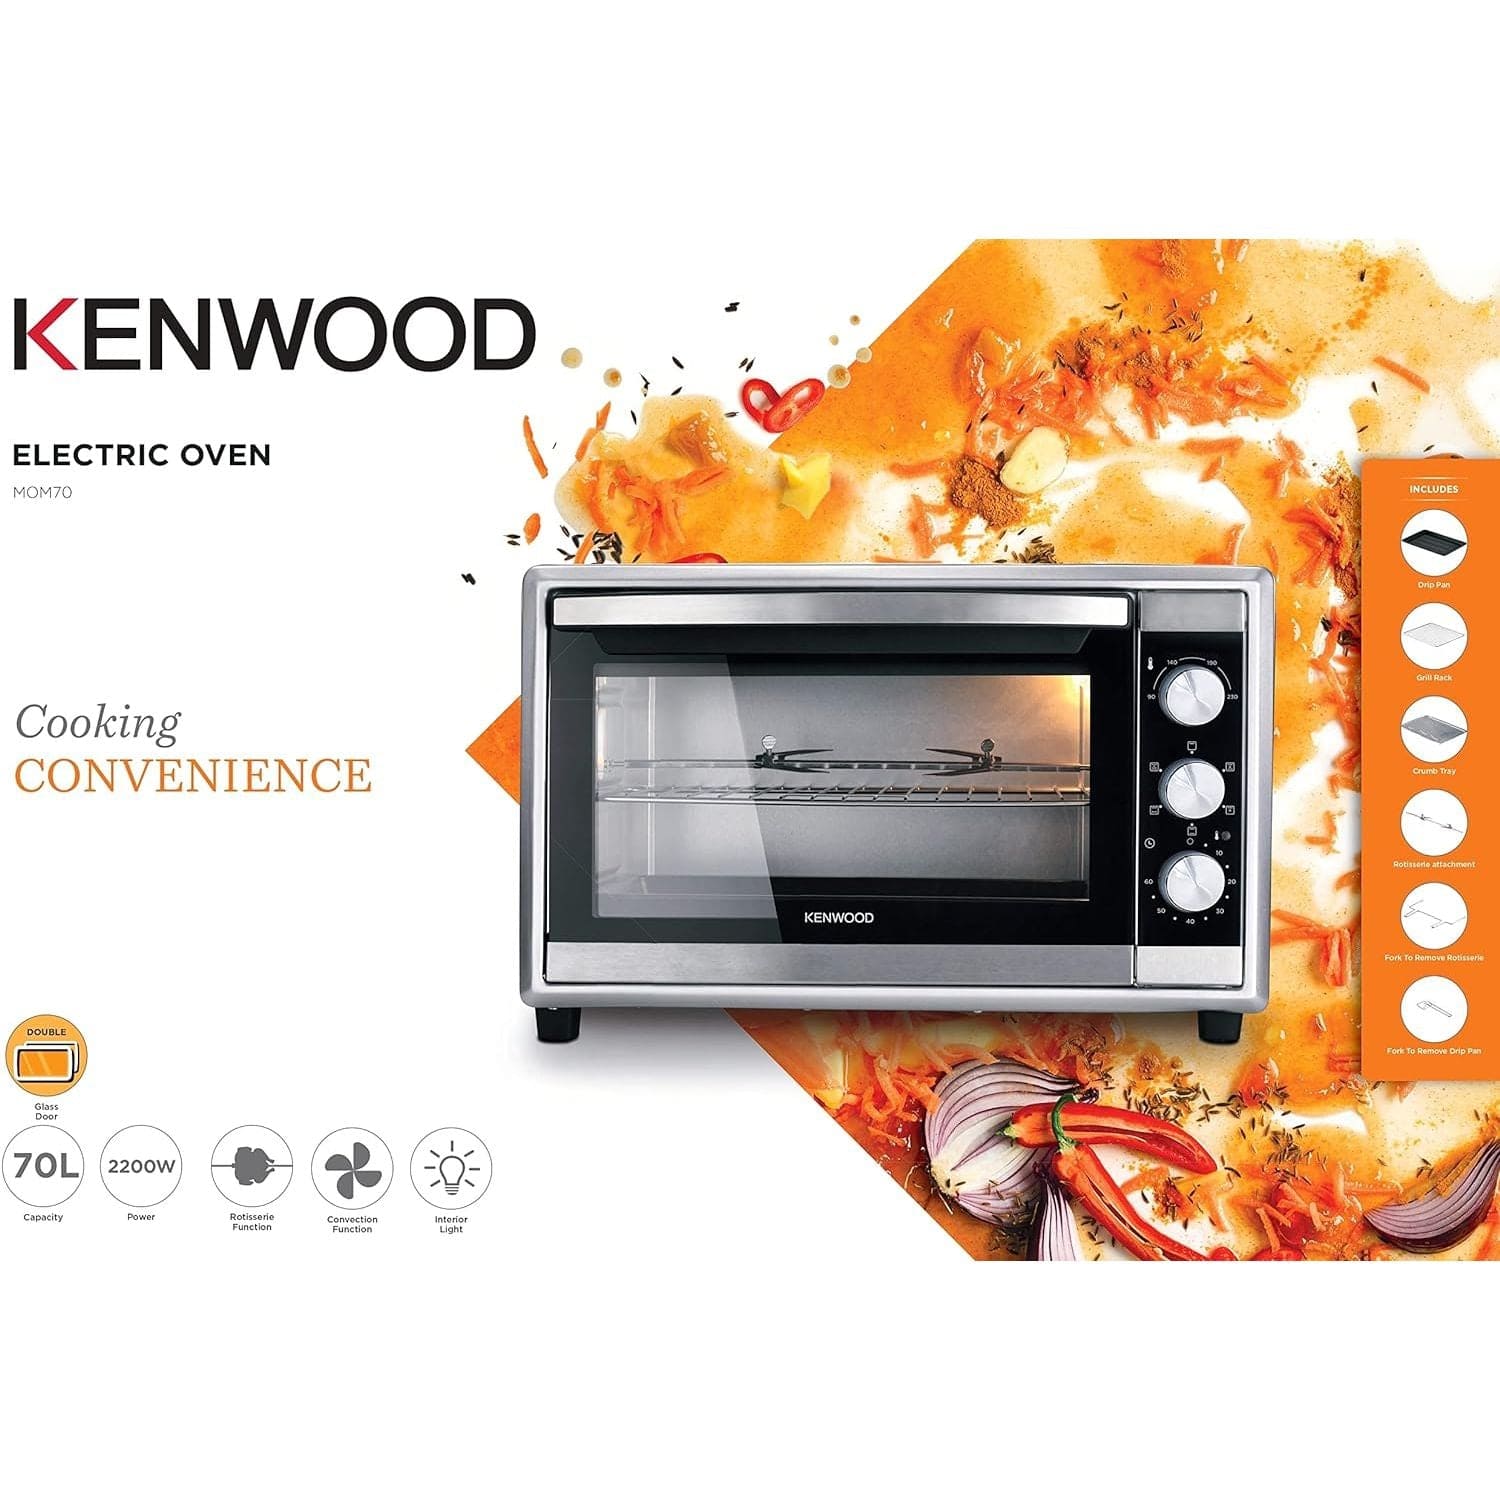 KENWOOD ELECTRIC OVEN 70L SILVER - MOM70.000SS